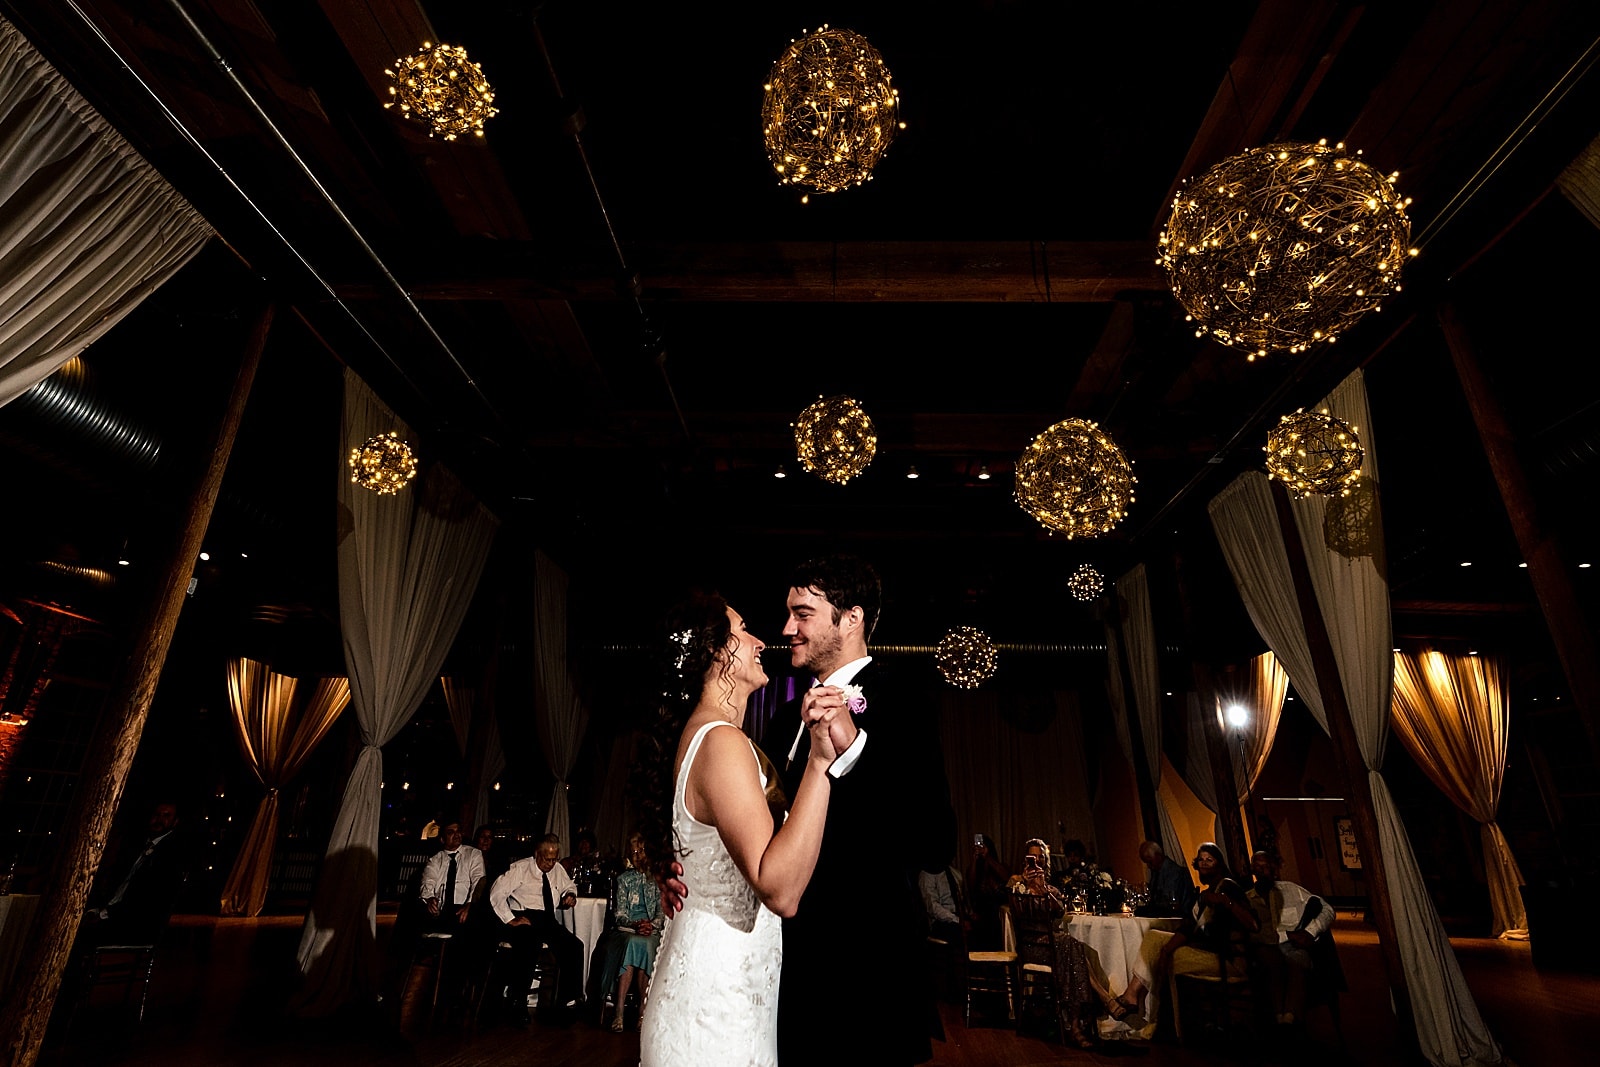 Fun reception moments | downtown durham wedding at the cotton room, images by Kivus & Camera